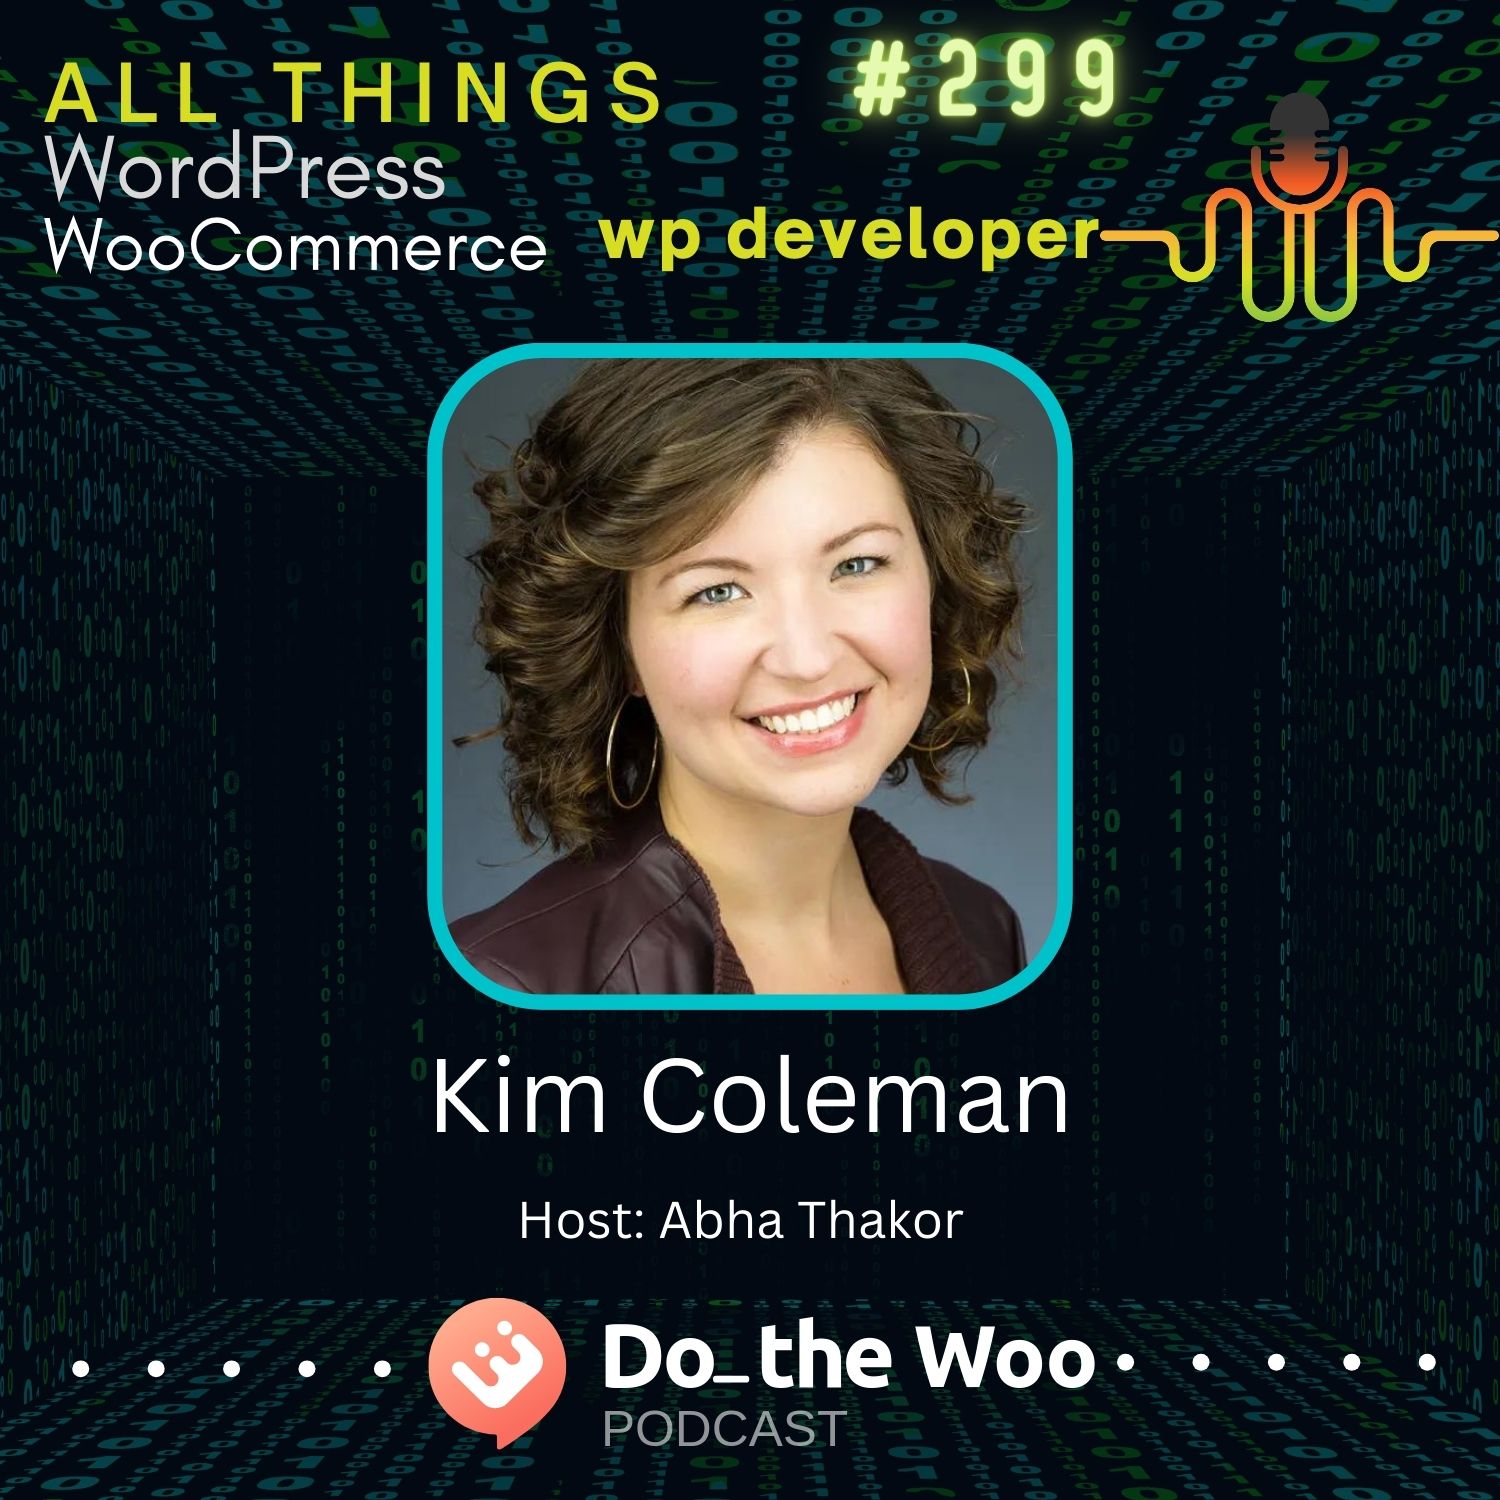 Cooking Up Some WordPress Code with Kim Coleman